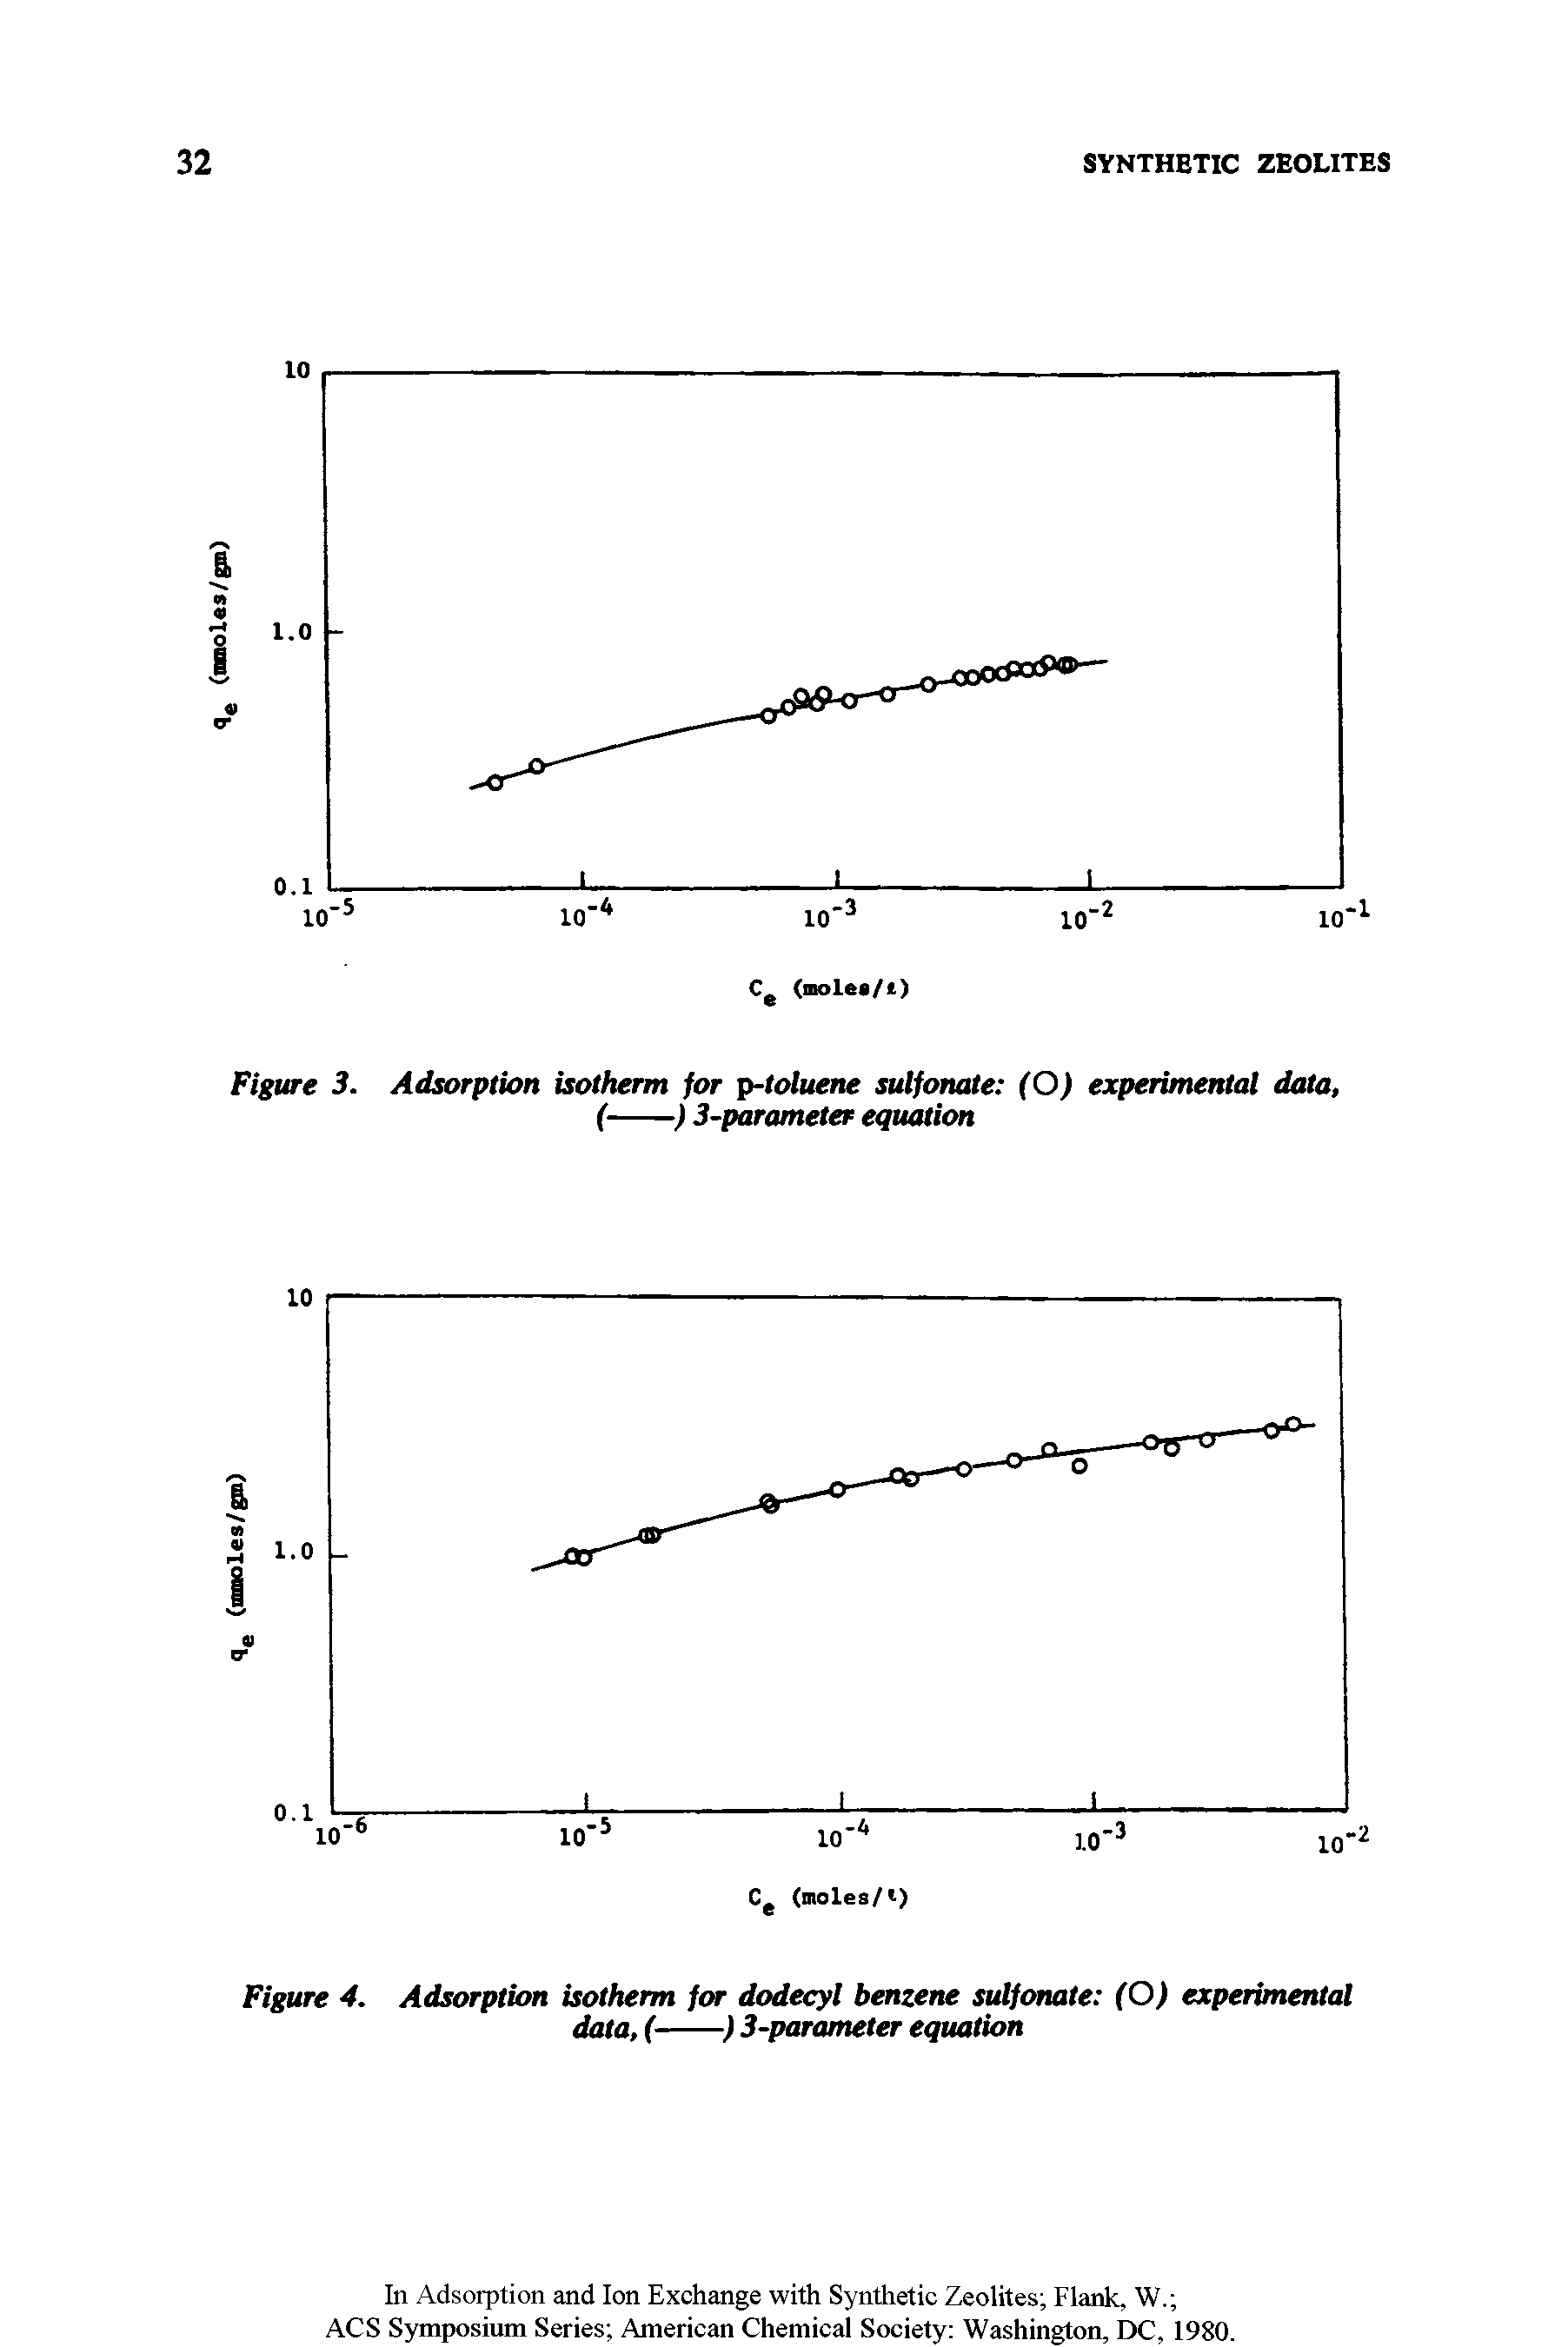 Figure 4. Adsorption isotherm for dodecyl benzene sulfonate (O) experimental data, (--------------------------) 3-parameter equation...